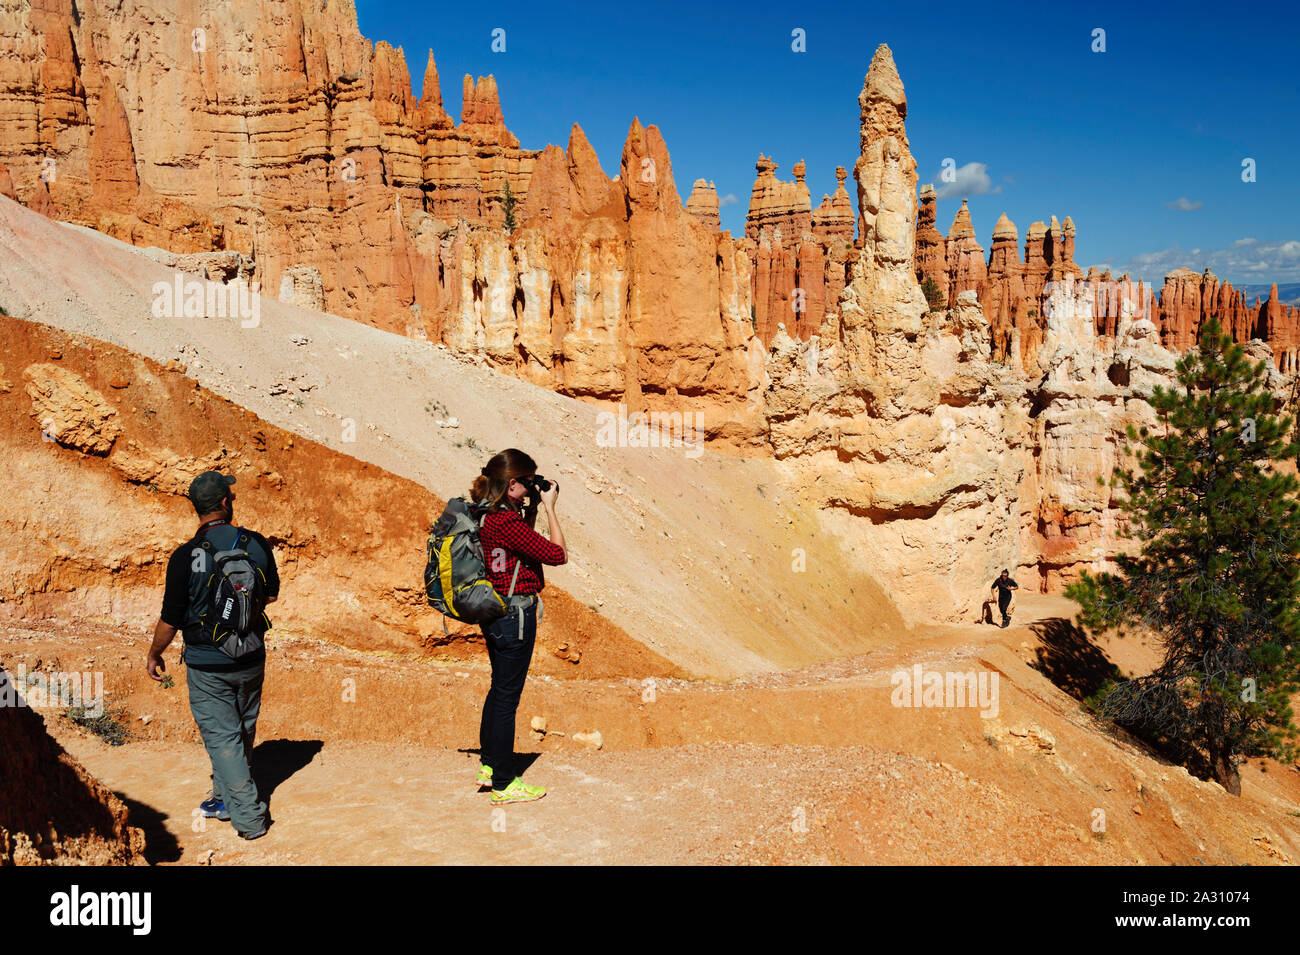 Female hiker taking a picture on the Queens Garden trail, Bryce Canyon National Park, Utah, USA. Stock Photo